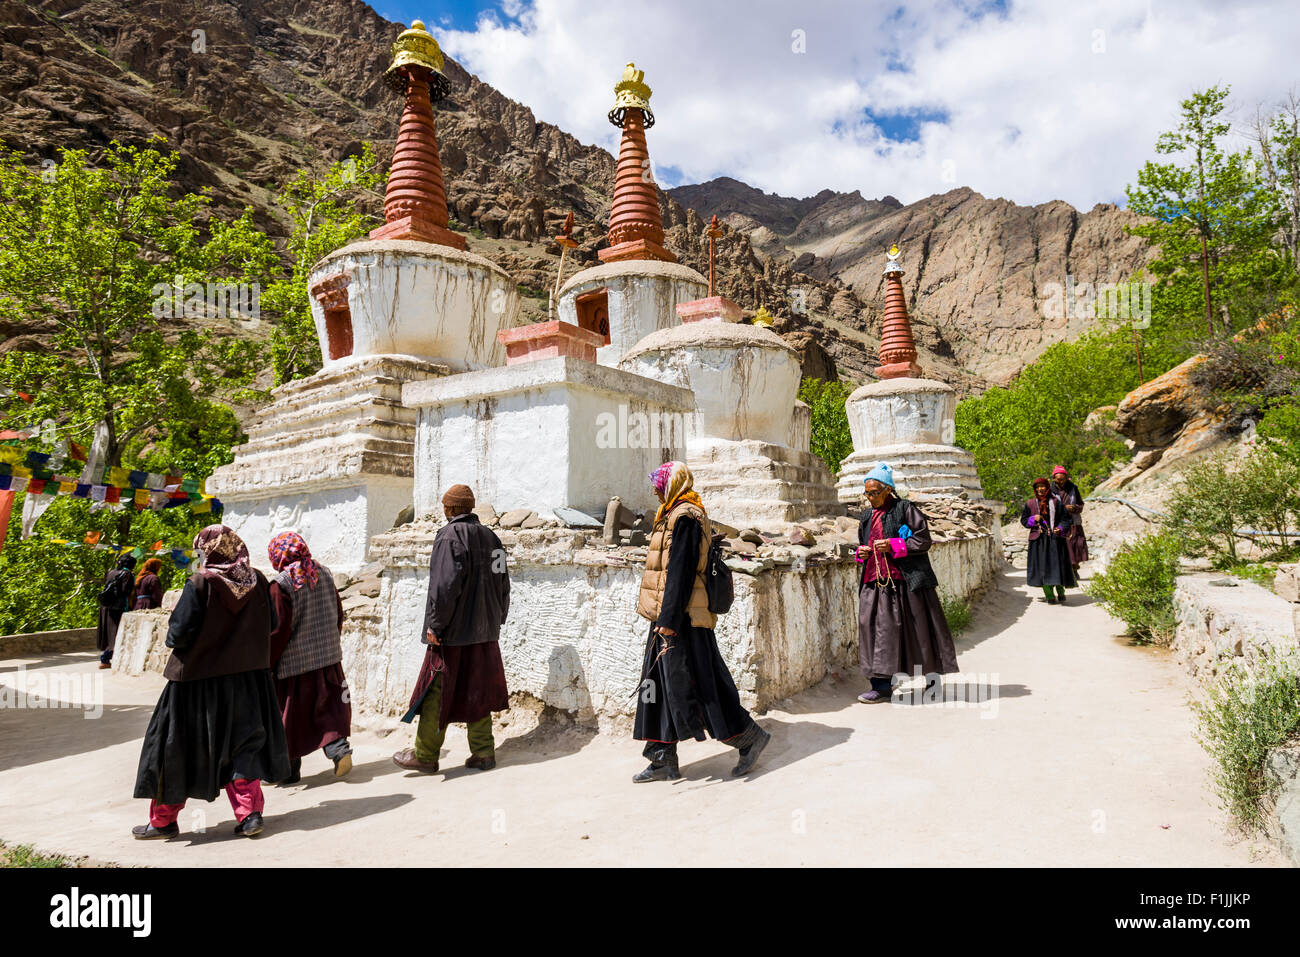 Local pilgrims are walking around a Chorten in a small valley above Hemis Gompa, Hemis, Jammu and Kashmir, India Stock Photo